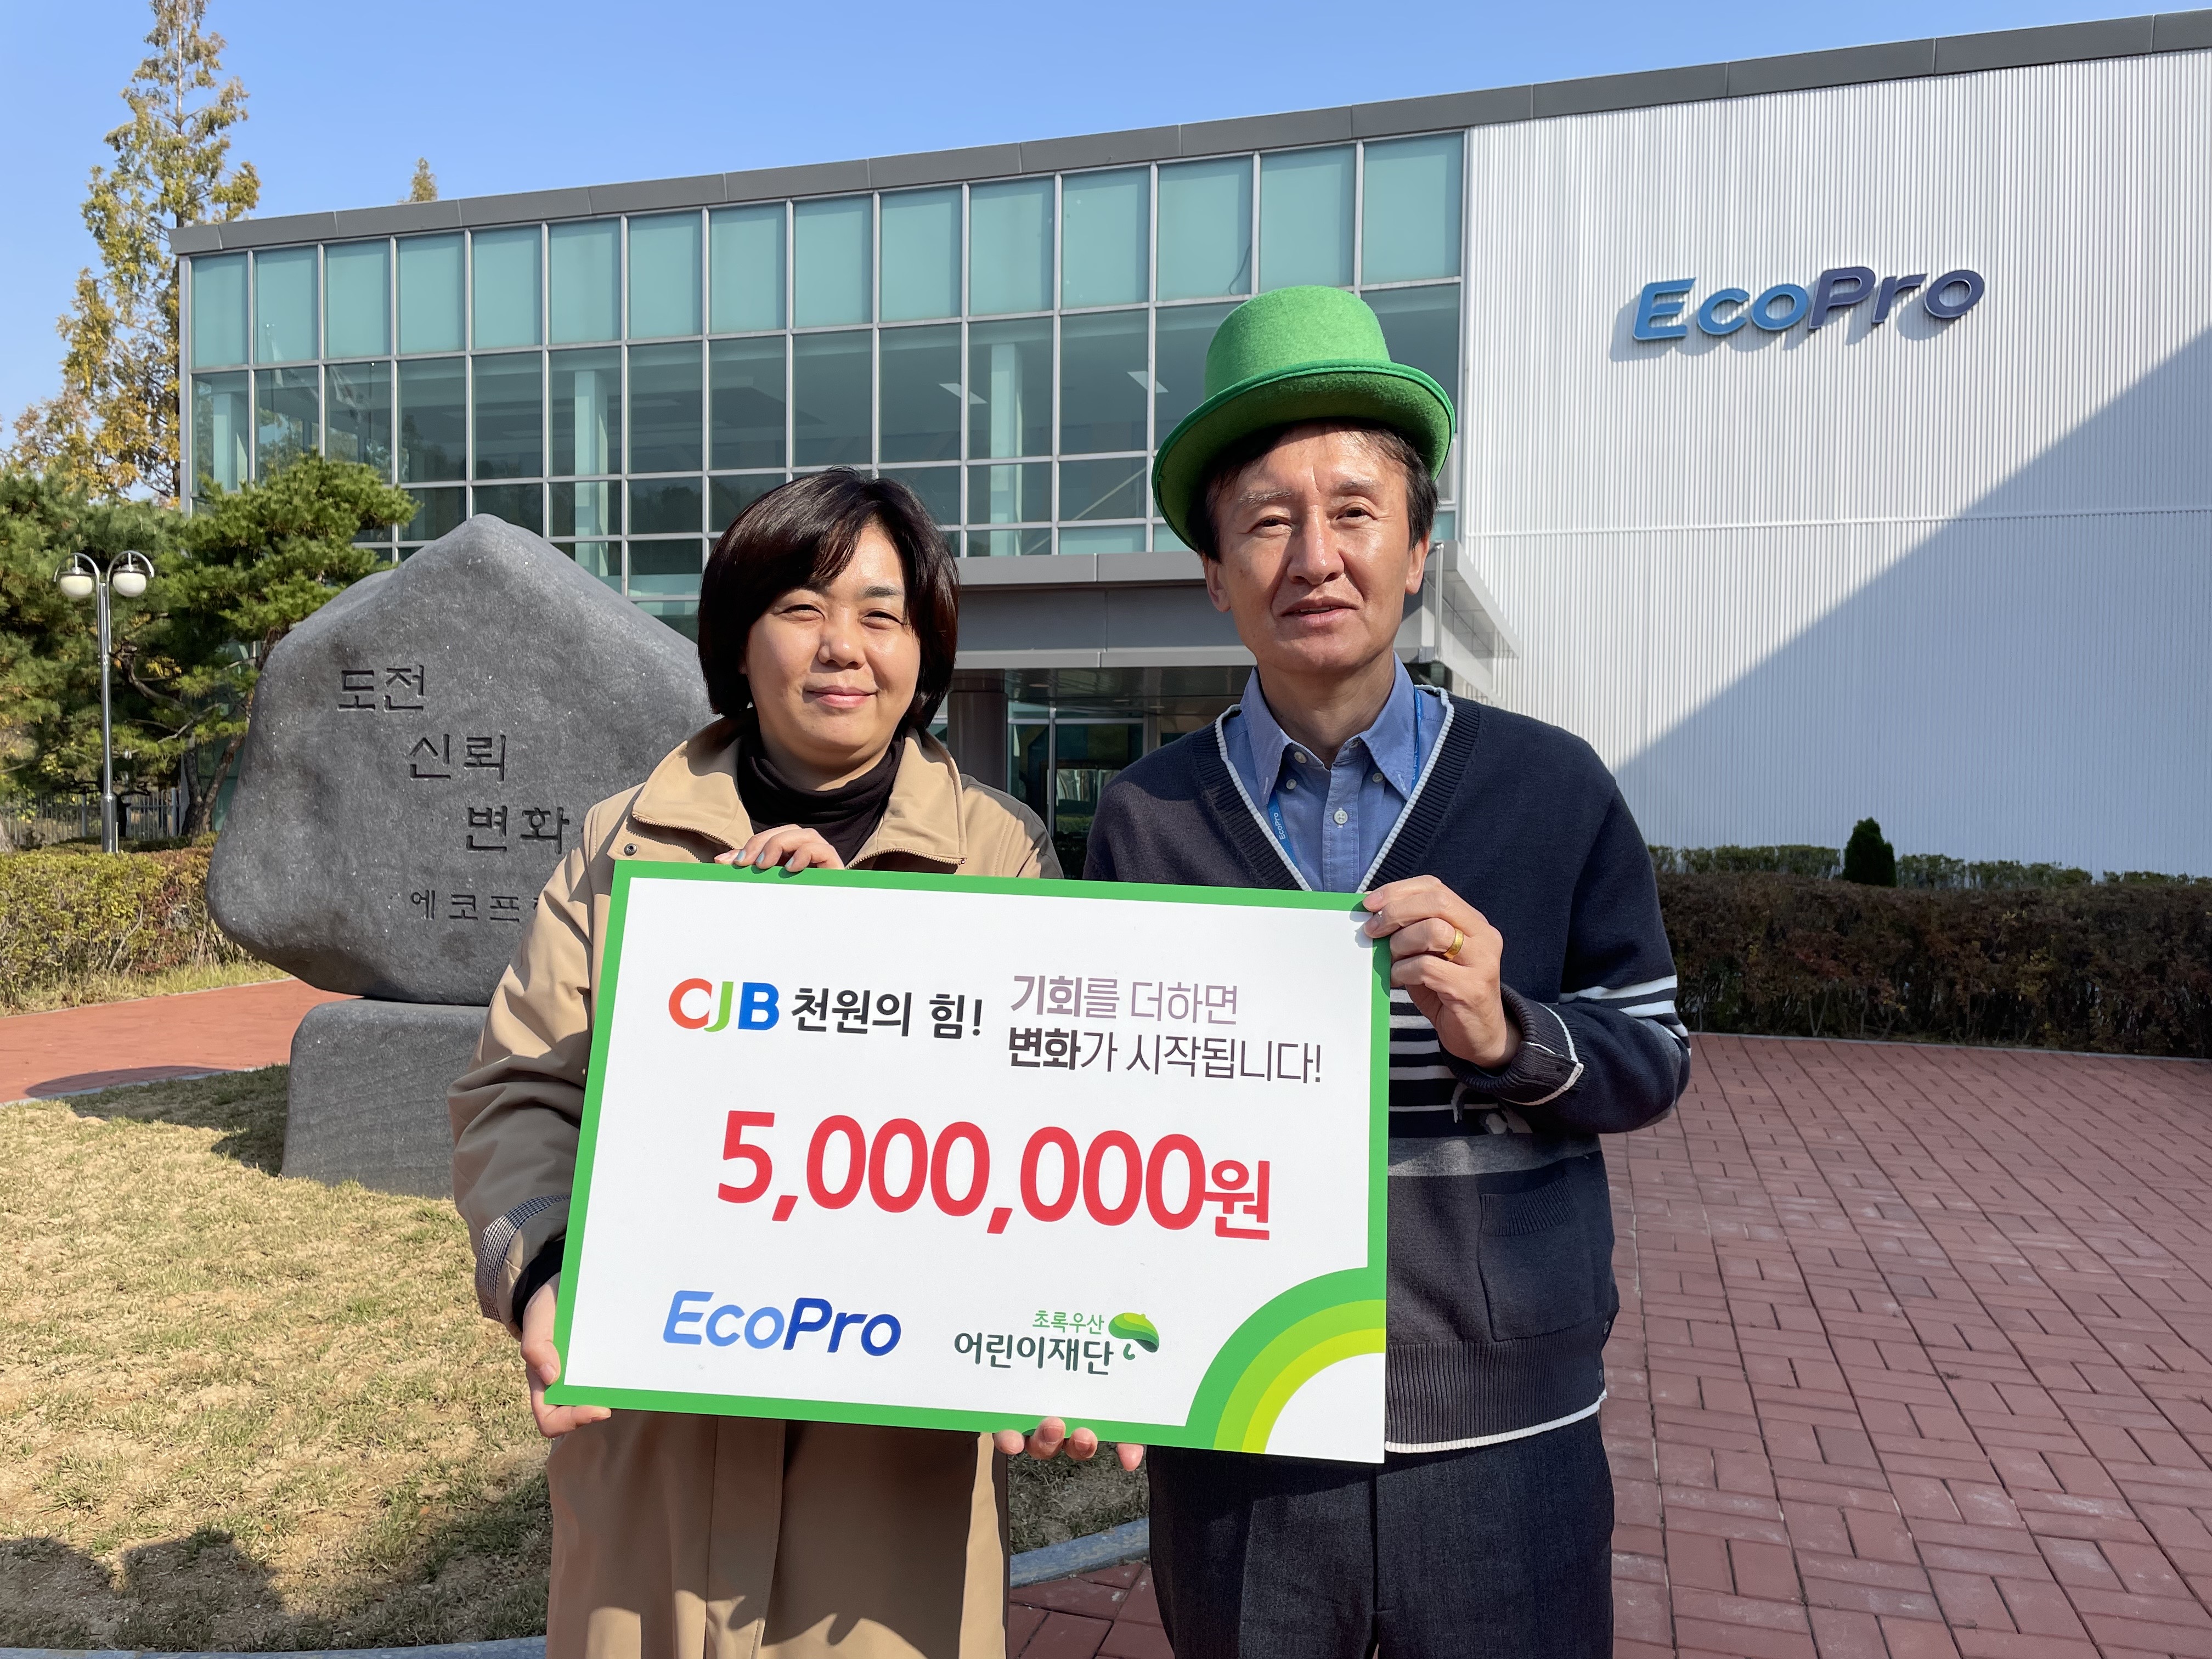 Ecopro donates donations to local children through 'Working Campaign' (2022.10.27)